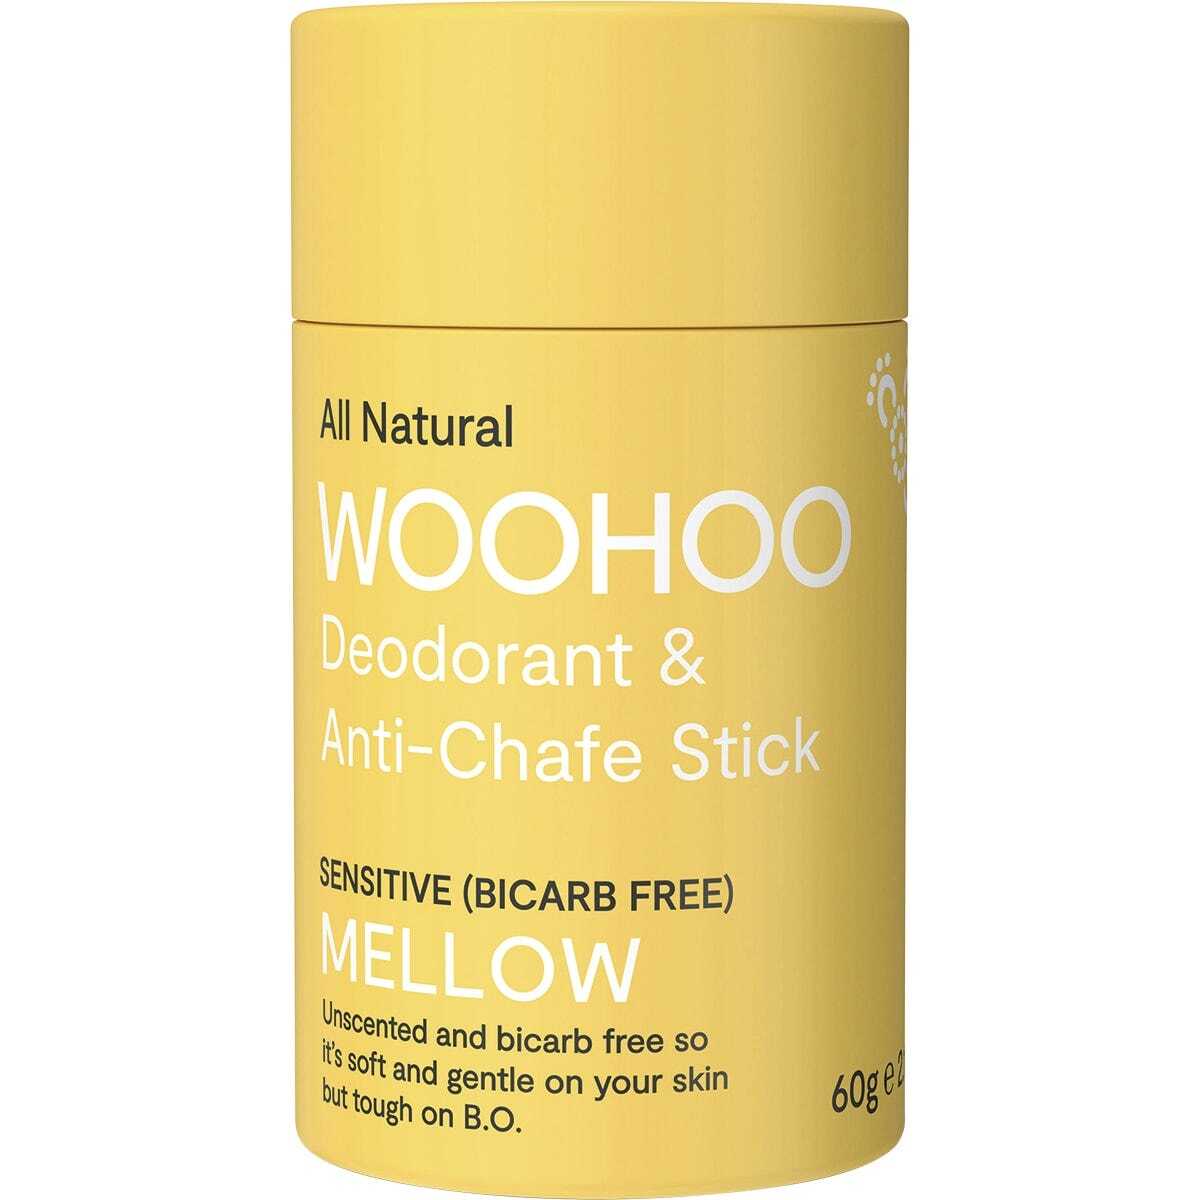 Woohoo Body Deodorant And Anti Chafe Stick Mellow 60g Healthy Being